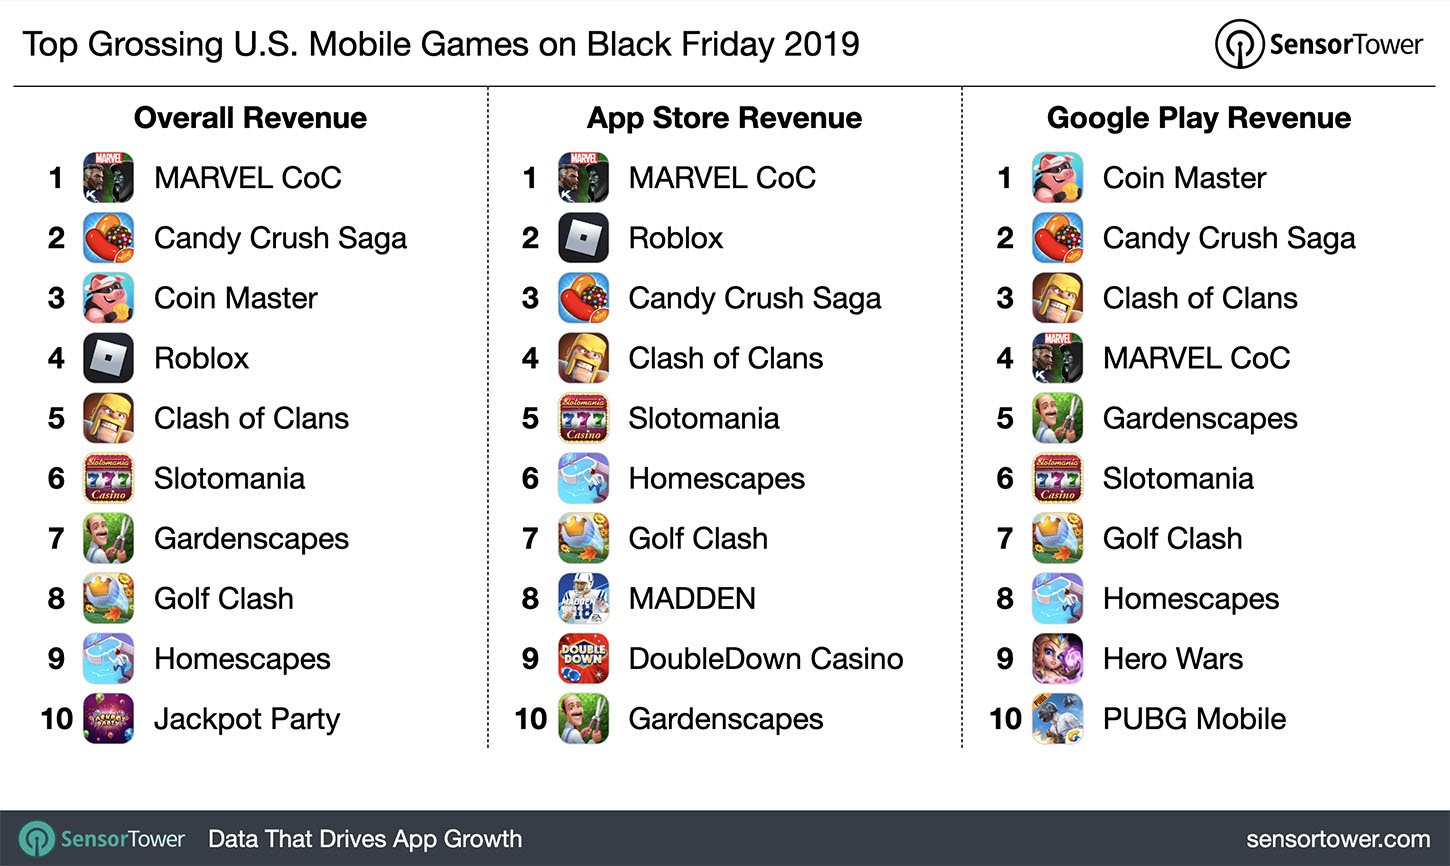 Call of Duty: Mobile didn't crack the Black Friday charts